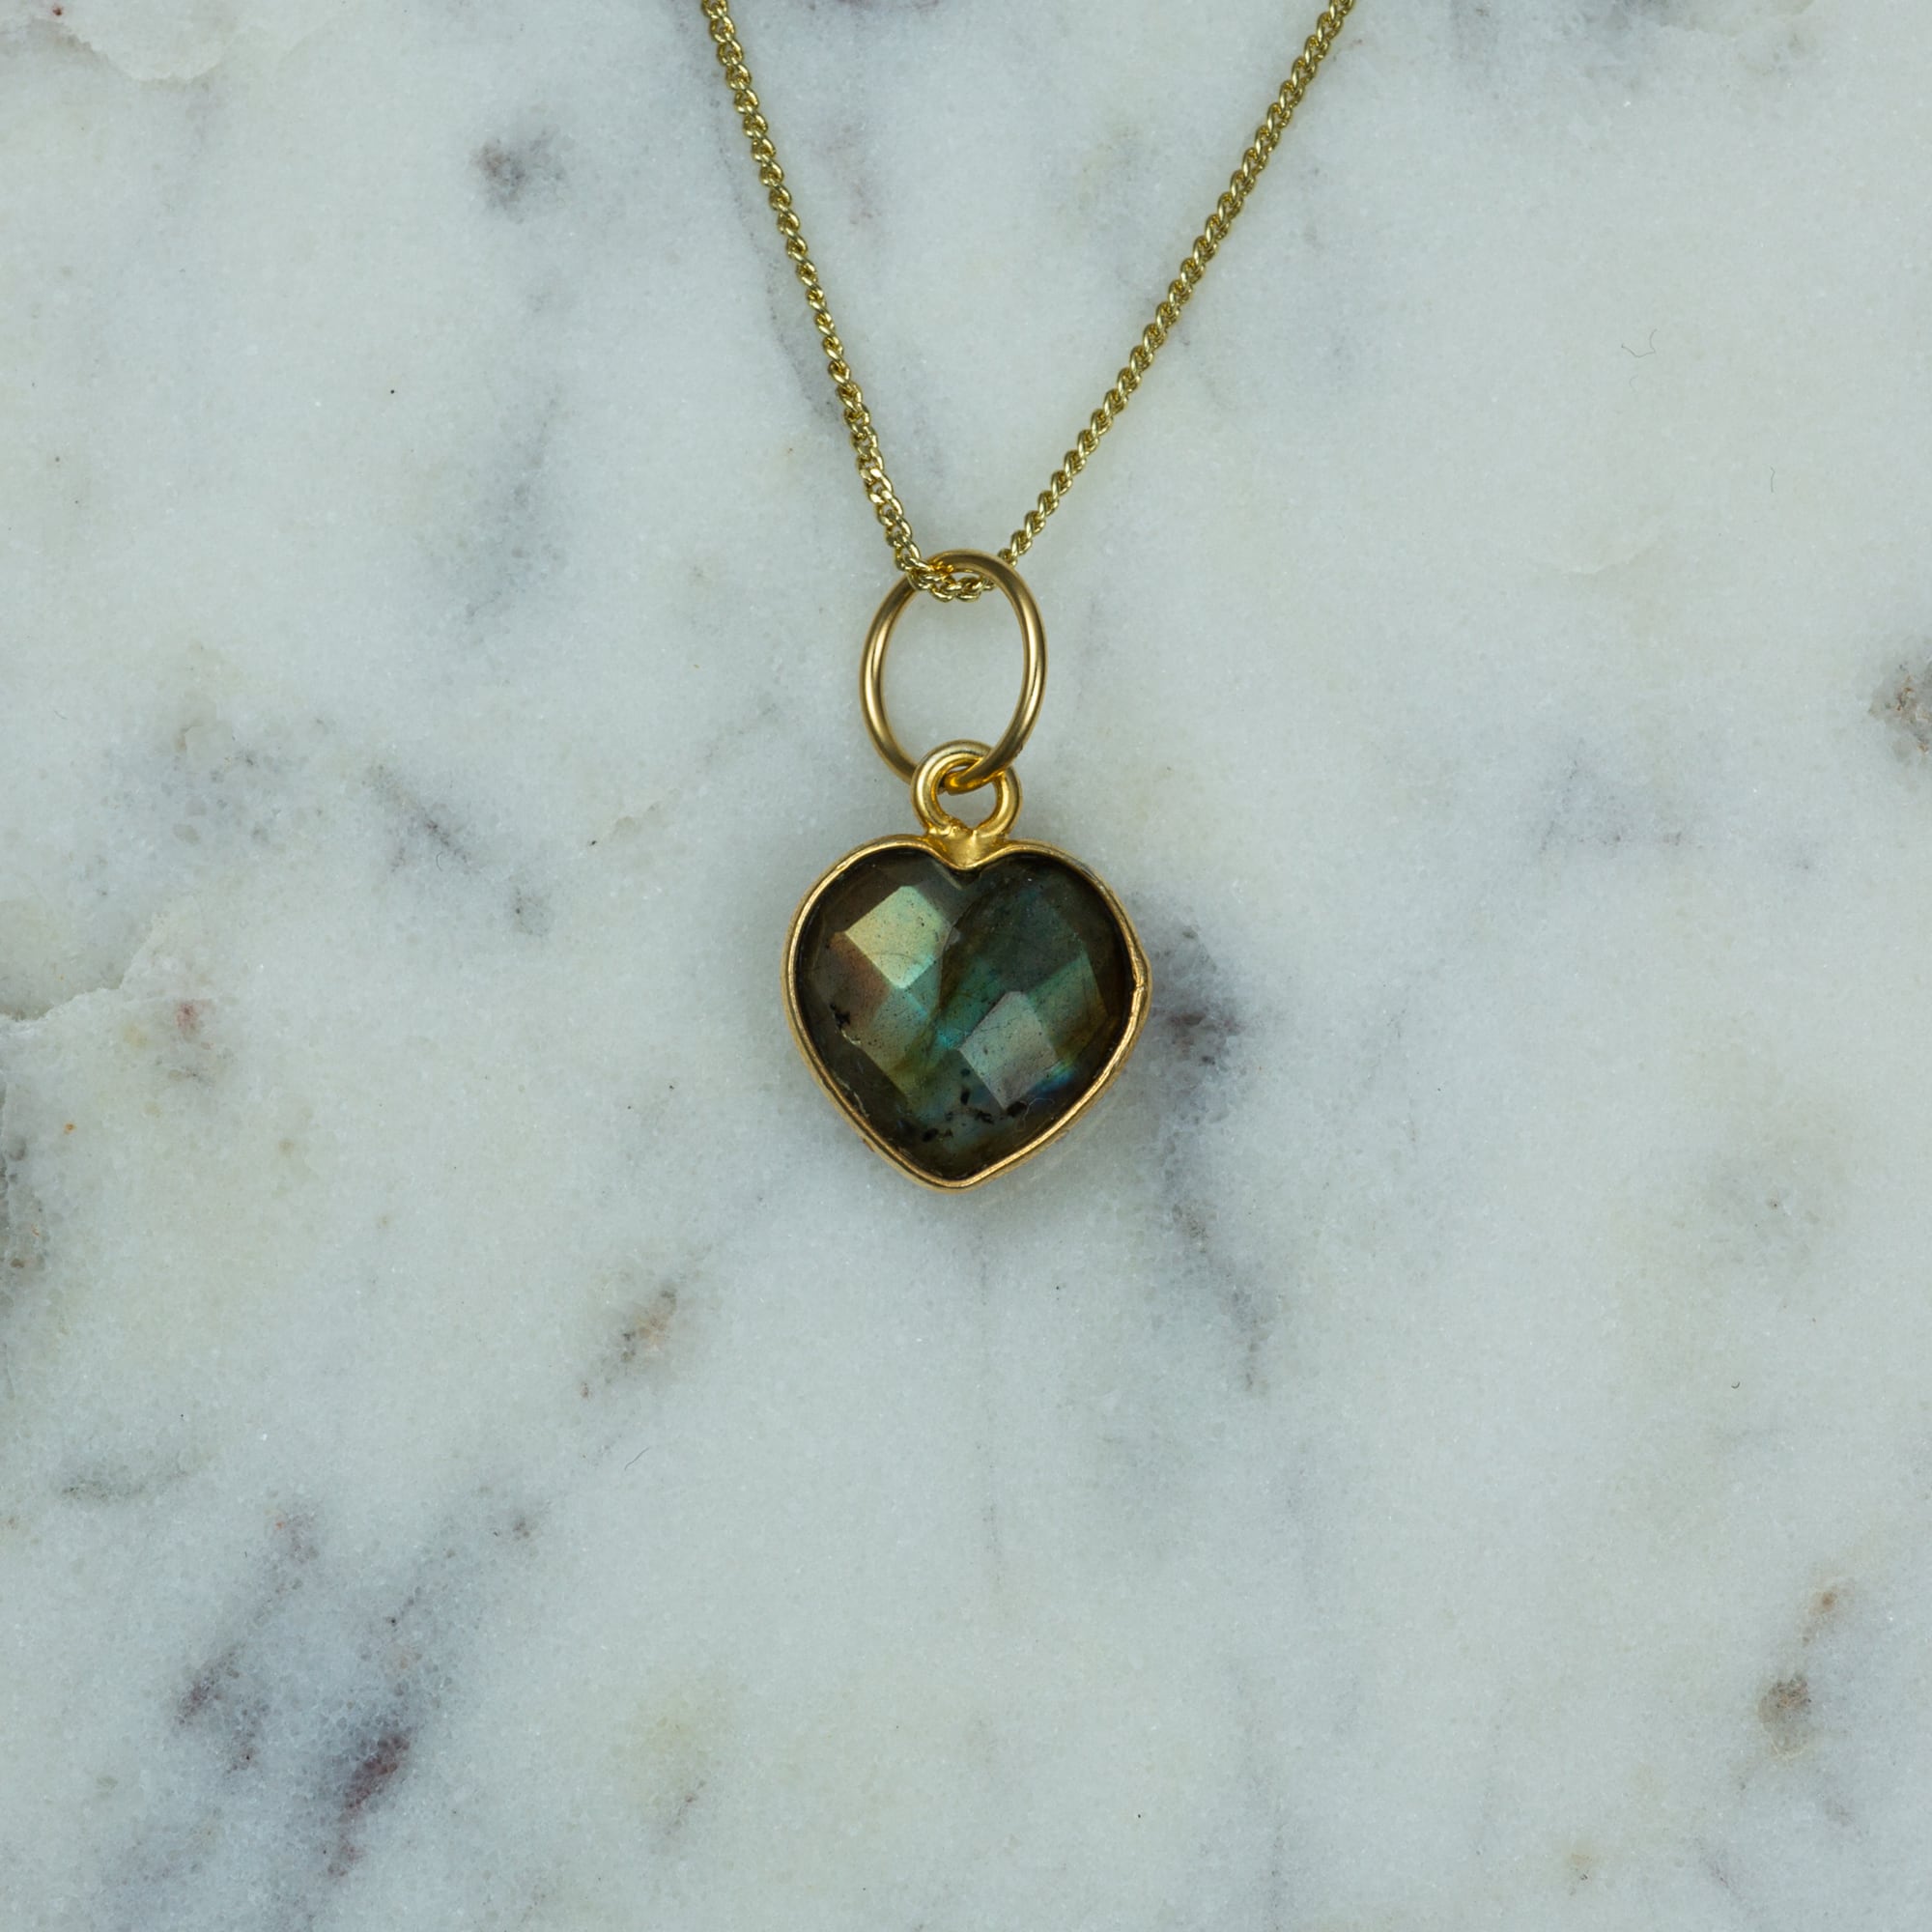 24k Gold Plated Heart Necklace - Necklaces